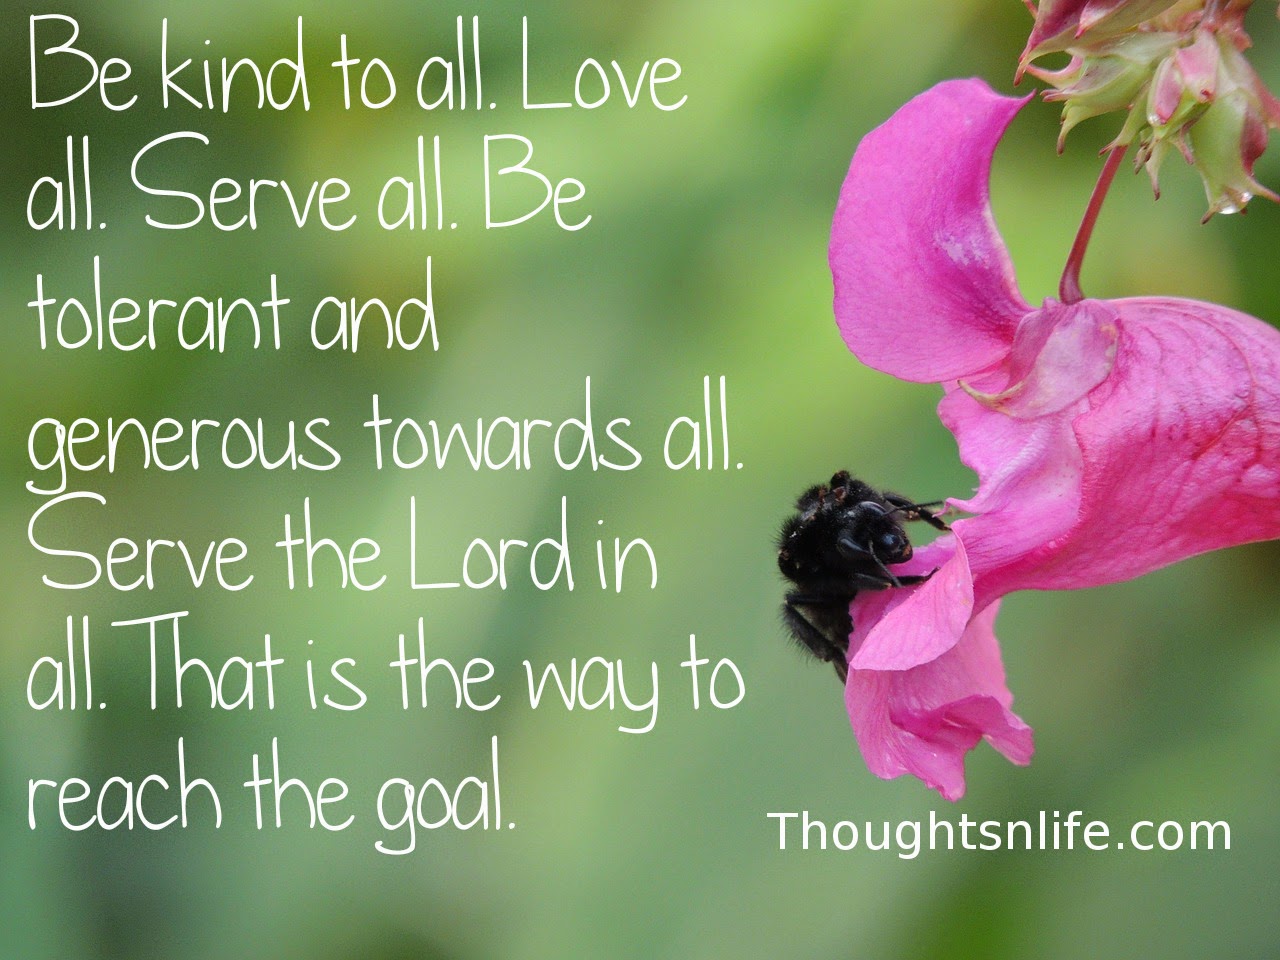 Be kind to all. Love all. Serve all. Be tolerant and generous towards all. Serve the Lord in all. That is the way to reach the goal.